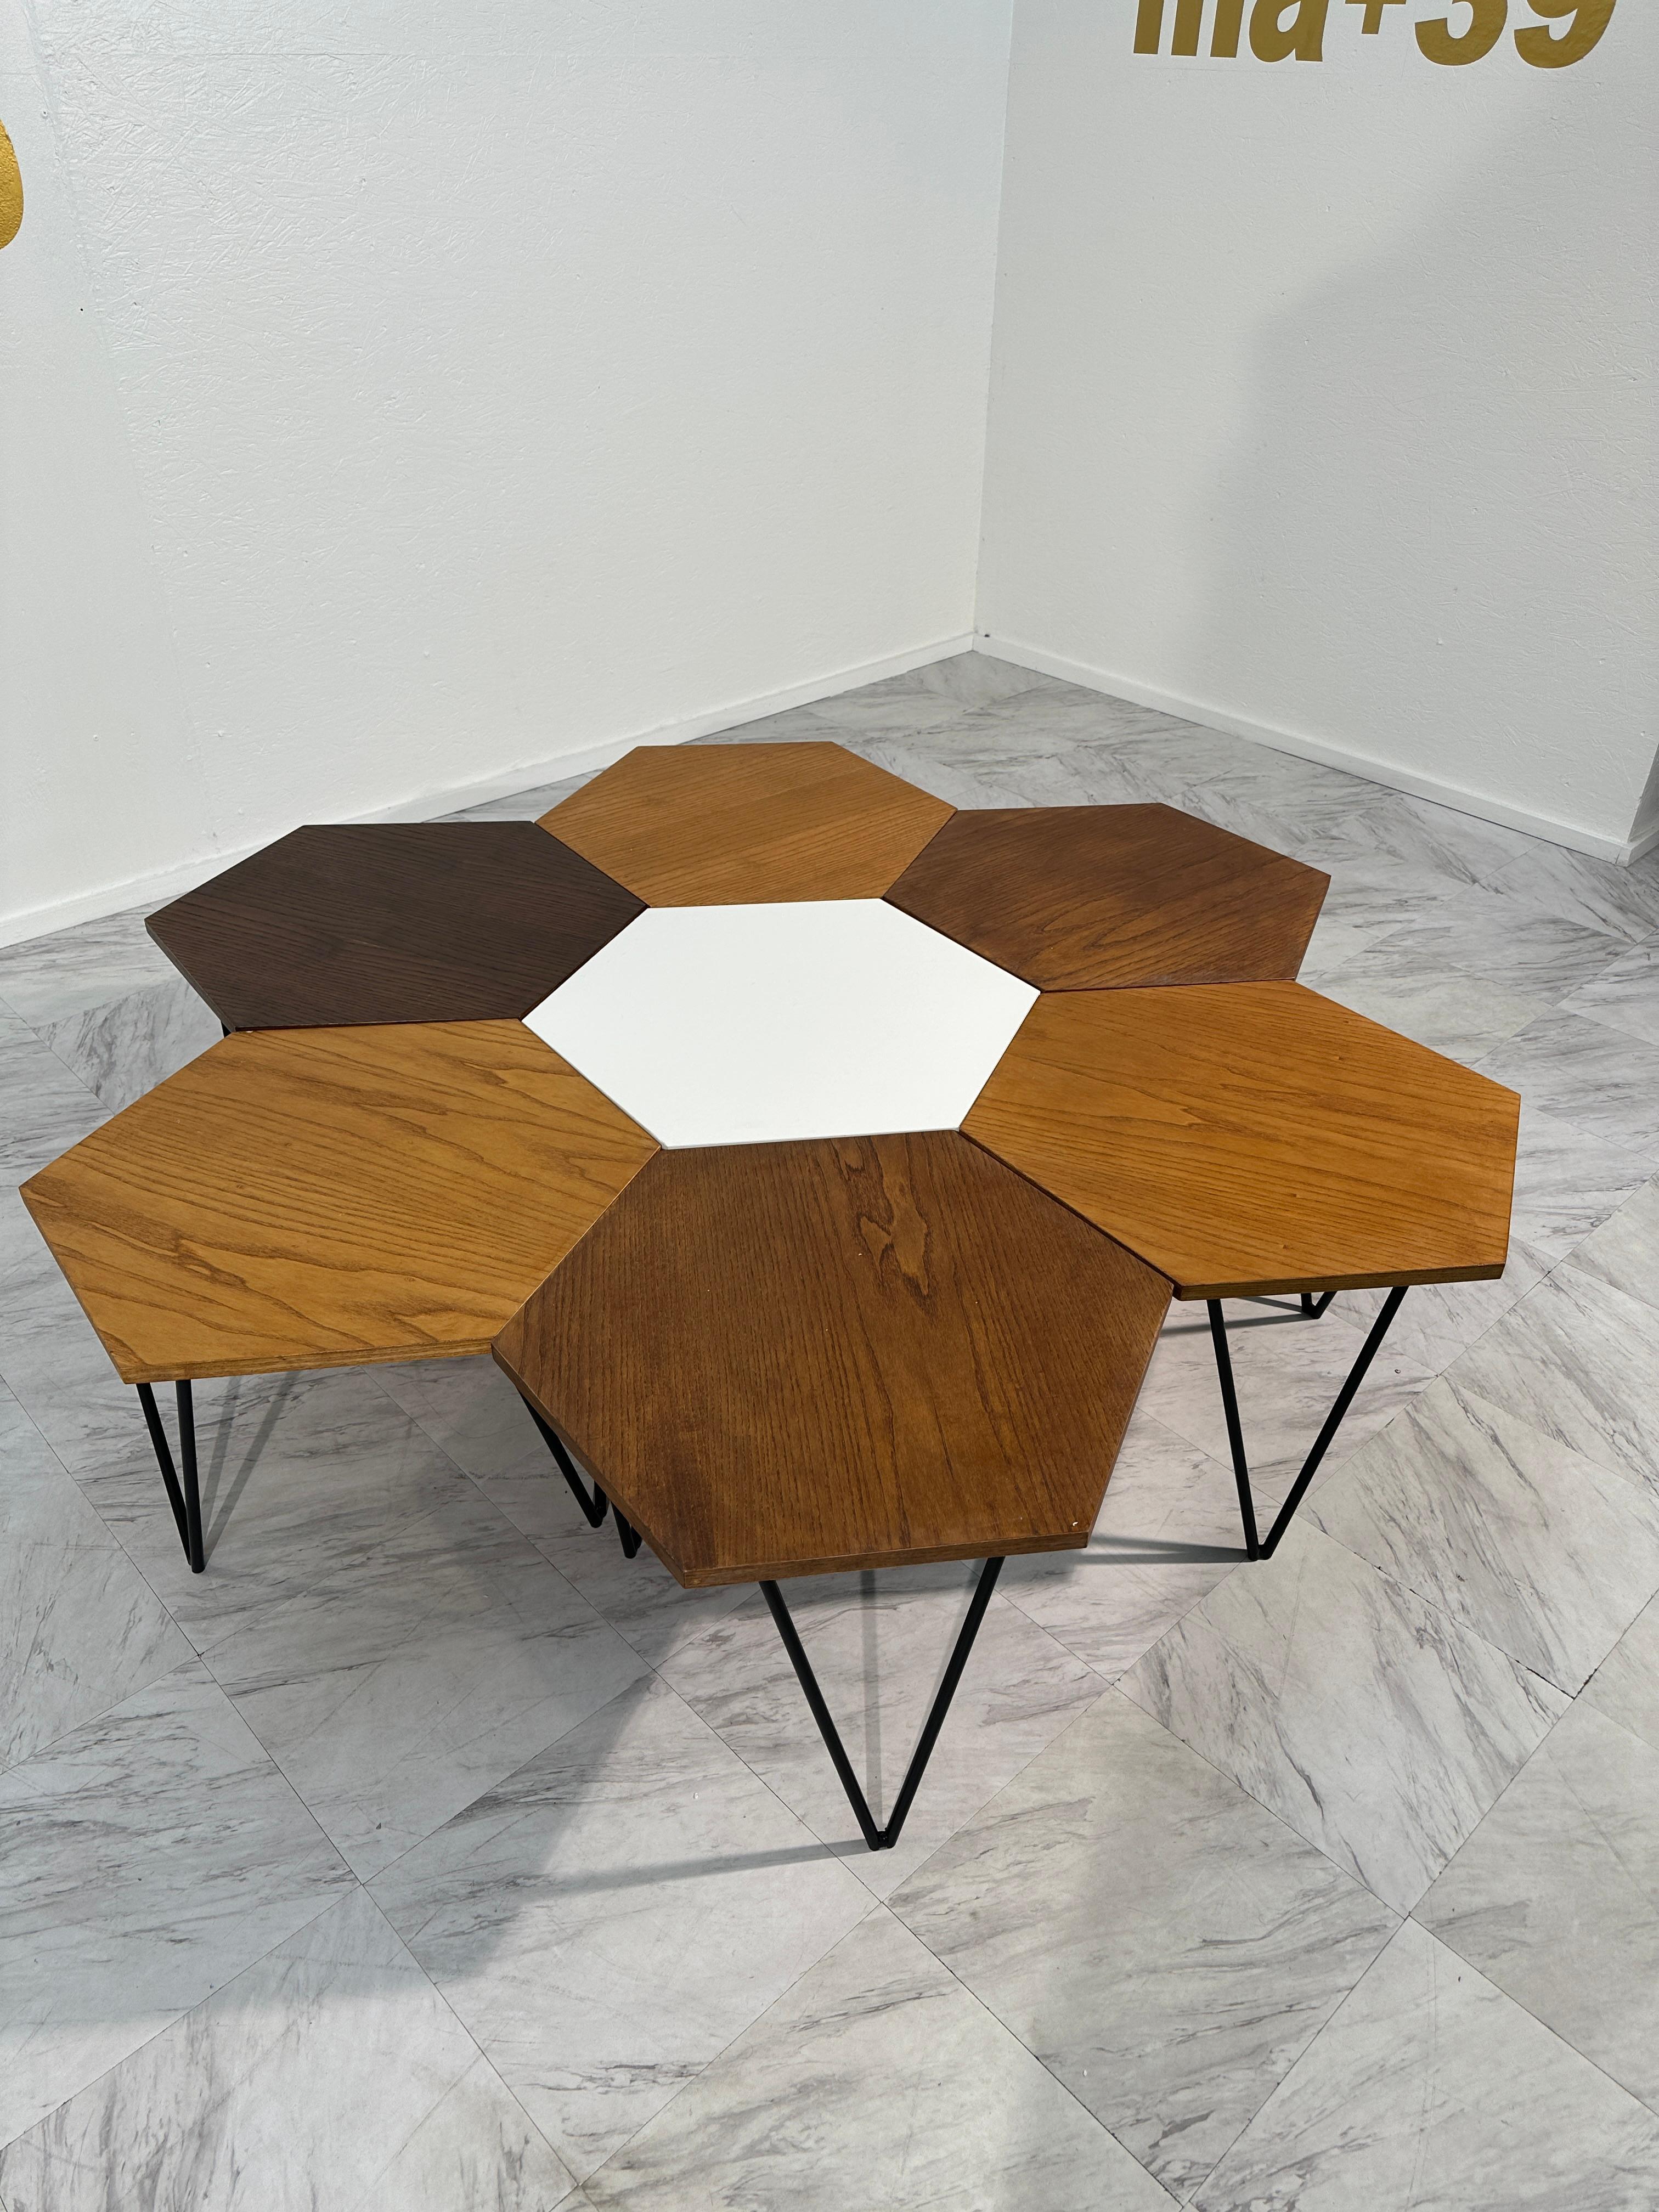 Immerse yourself in the epitome of mid-century Italian design with this exceptionally rare set of modular coffee tables by Gio Ponti, meticulously crafted by ISA Bergamo in the 1950s. Each piece bears the mark of authenticity with a metal